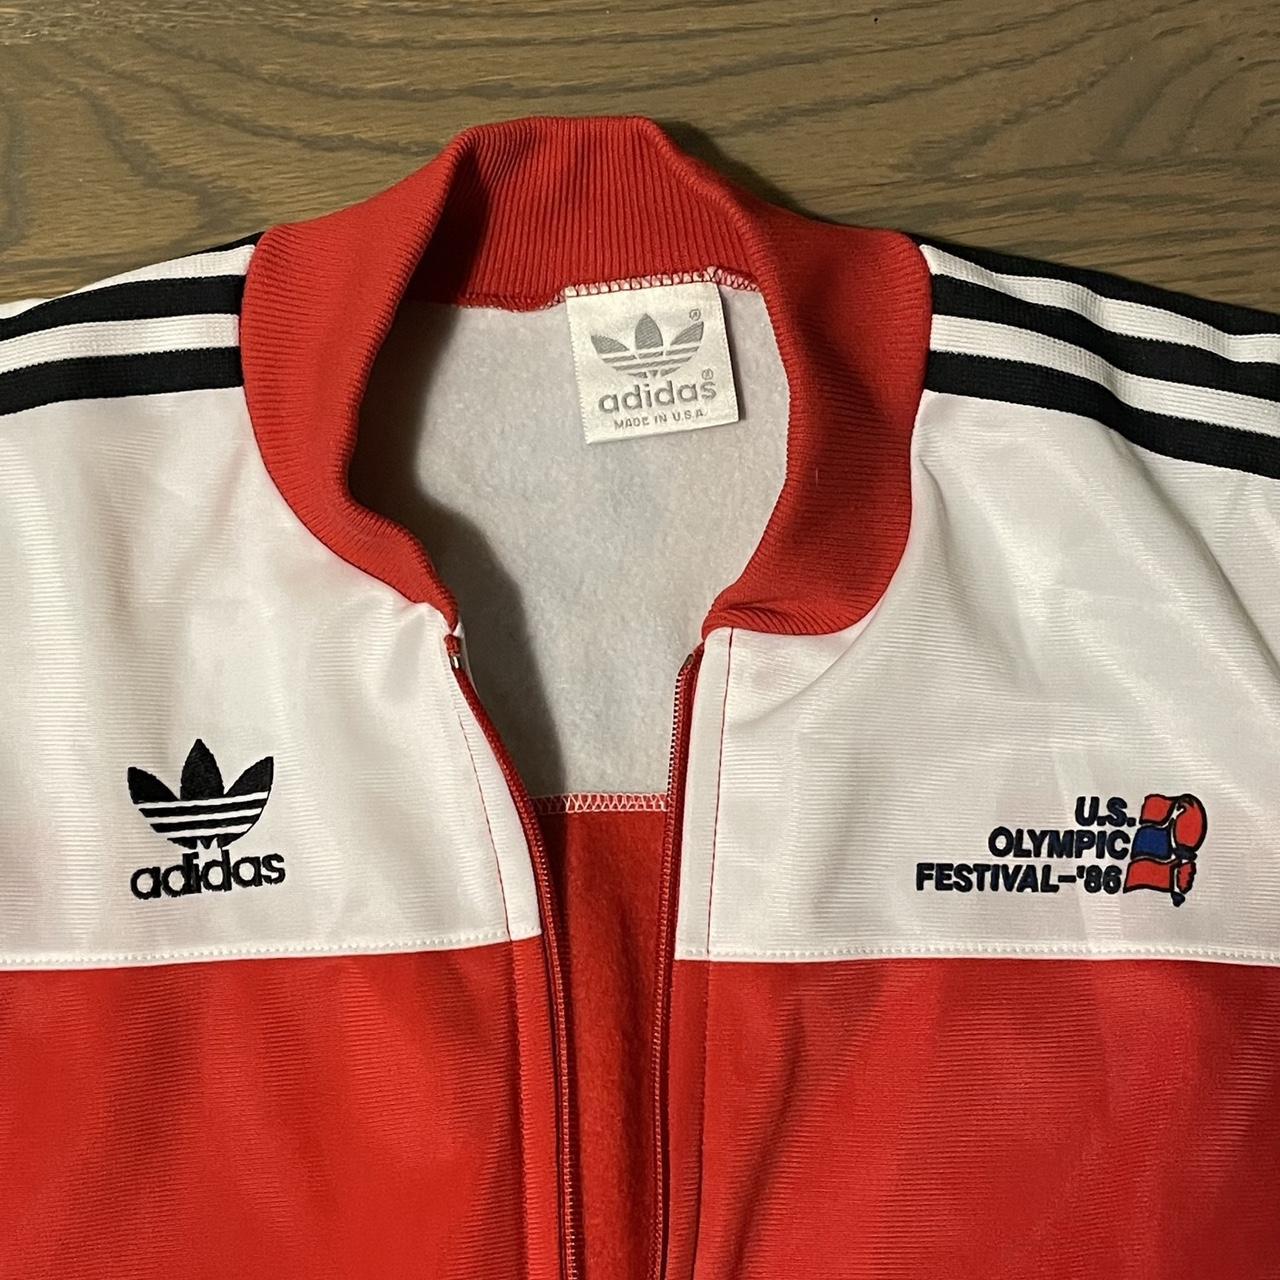 Adidas Men's White and Red Jacket | Depop